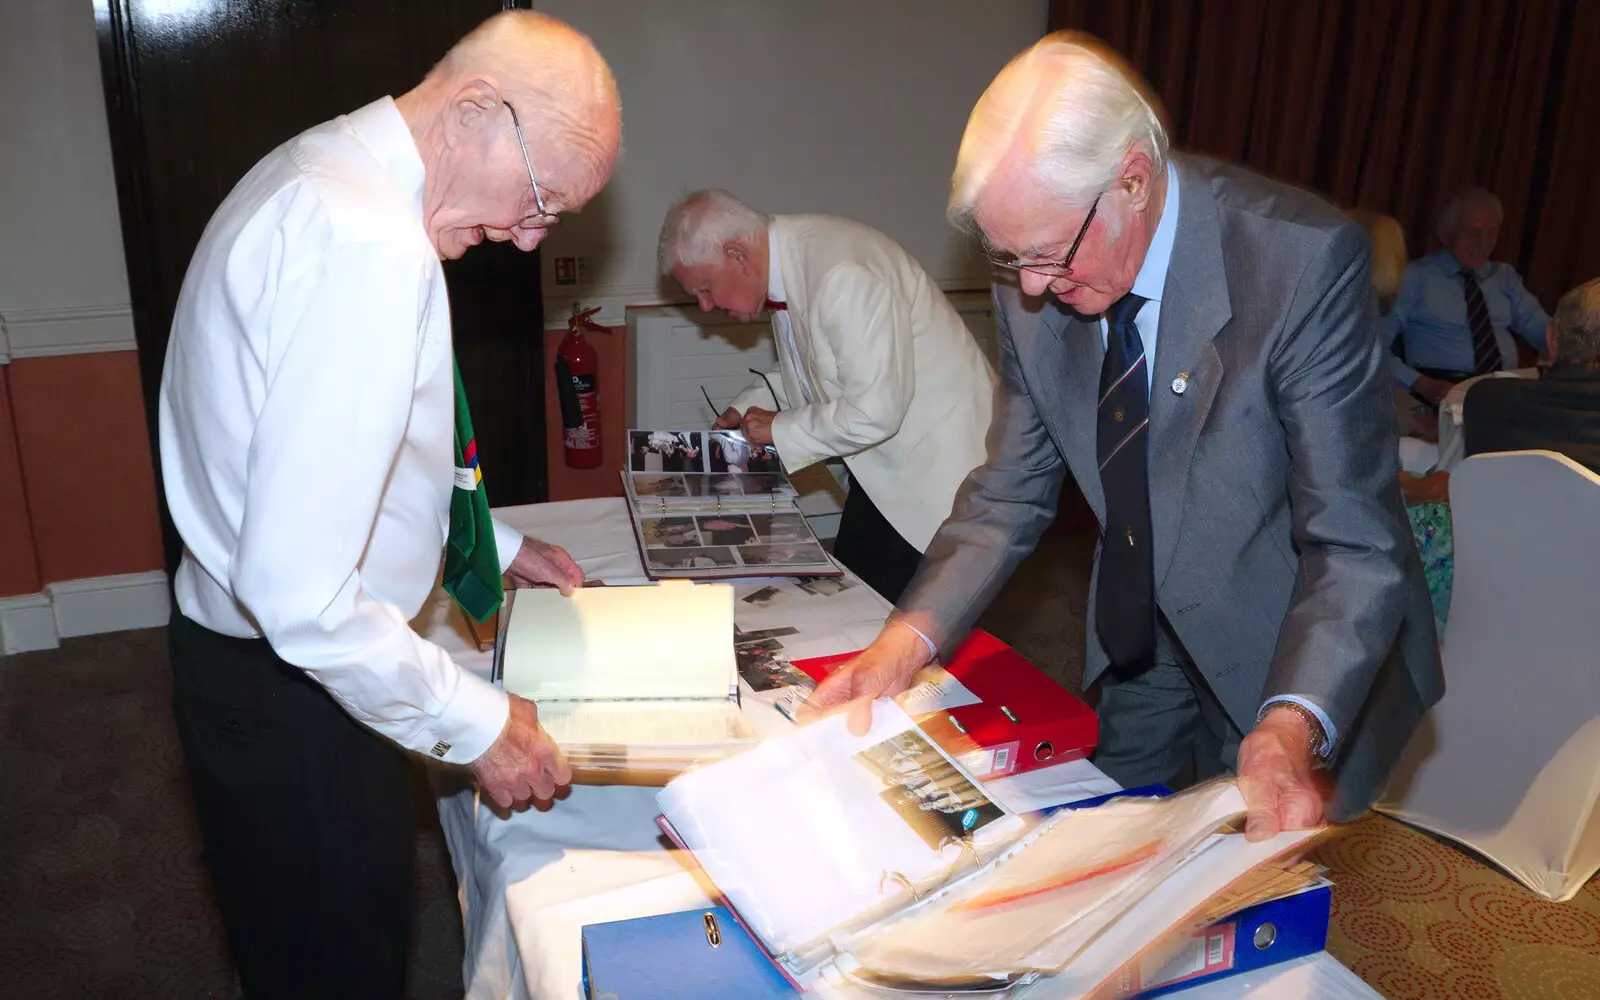 More history browsing, from Kenilworth Castle and the 69th Entry Reunion Dinner, Stratford, Warwickshire - 14th September 2019